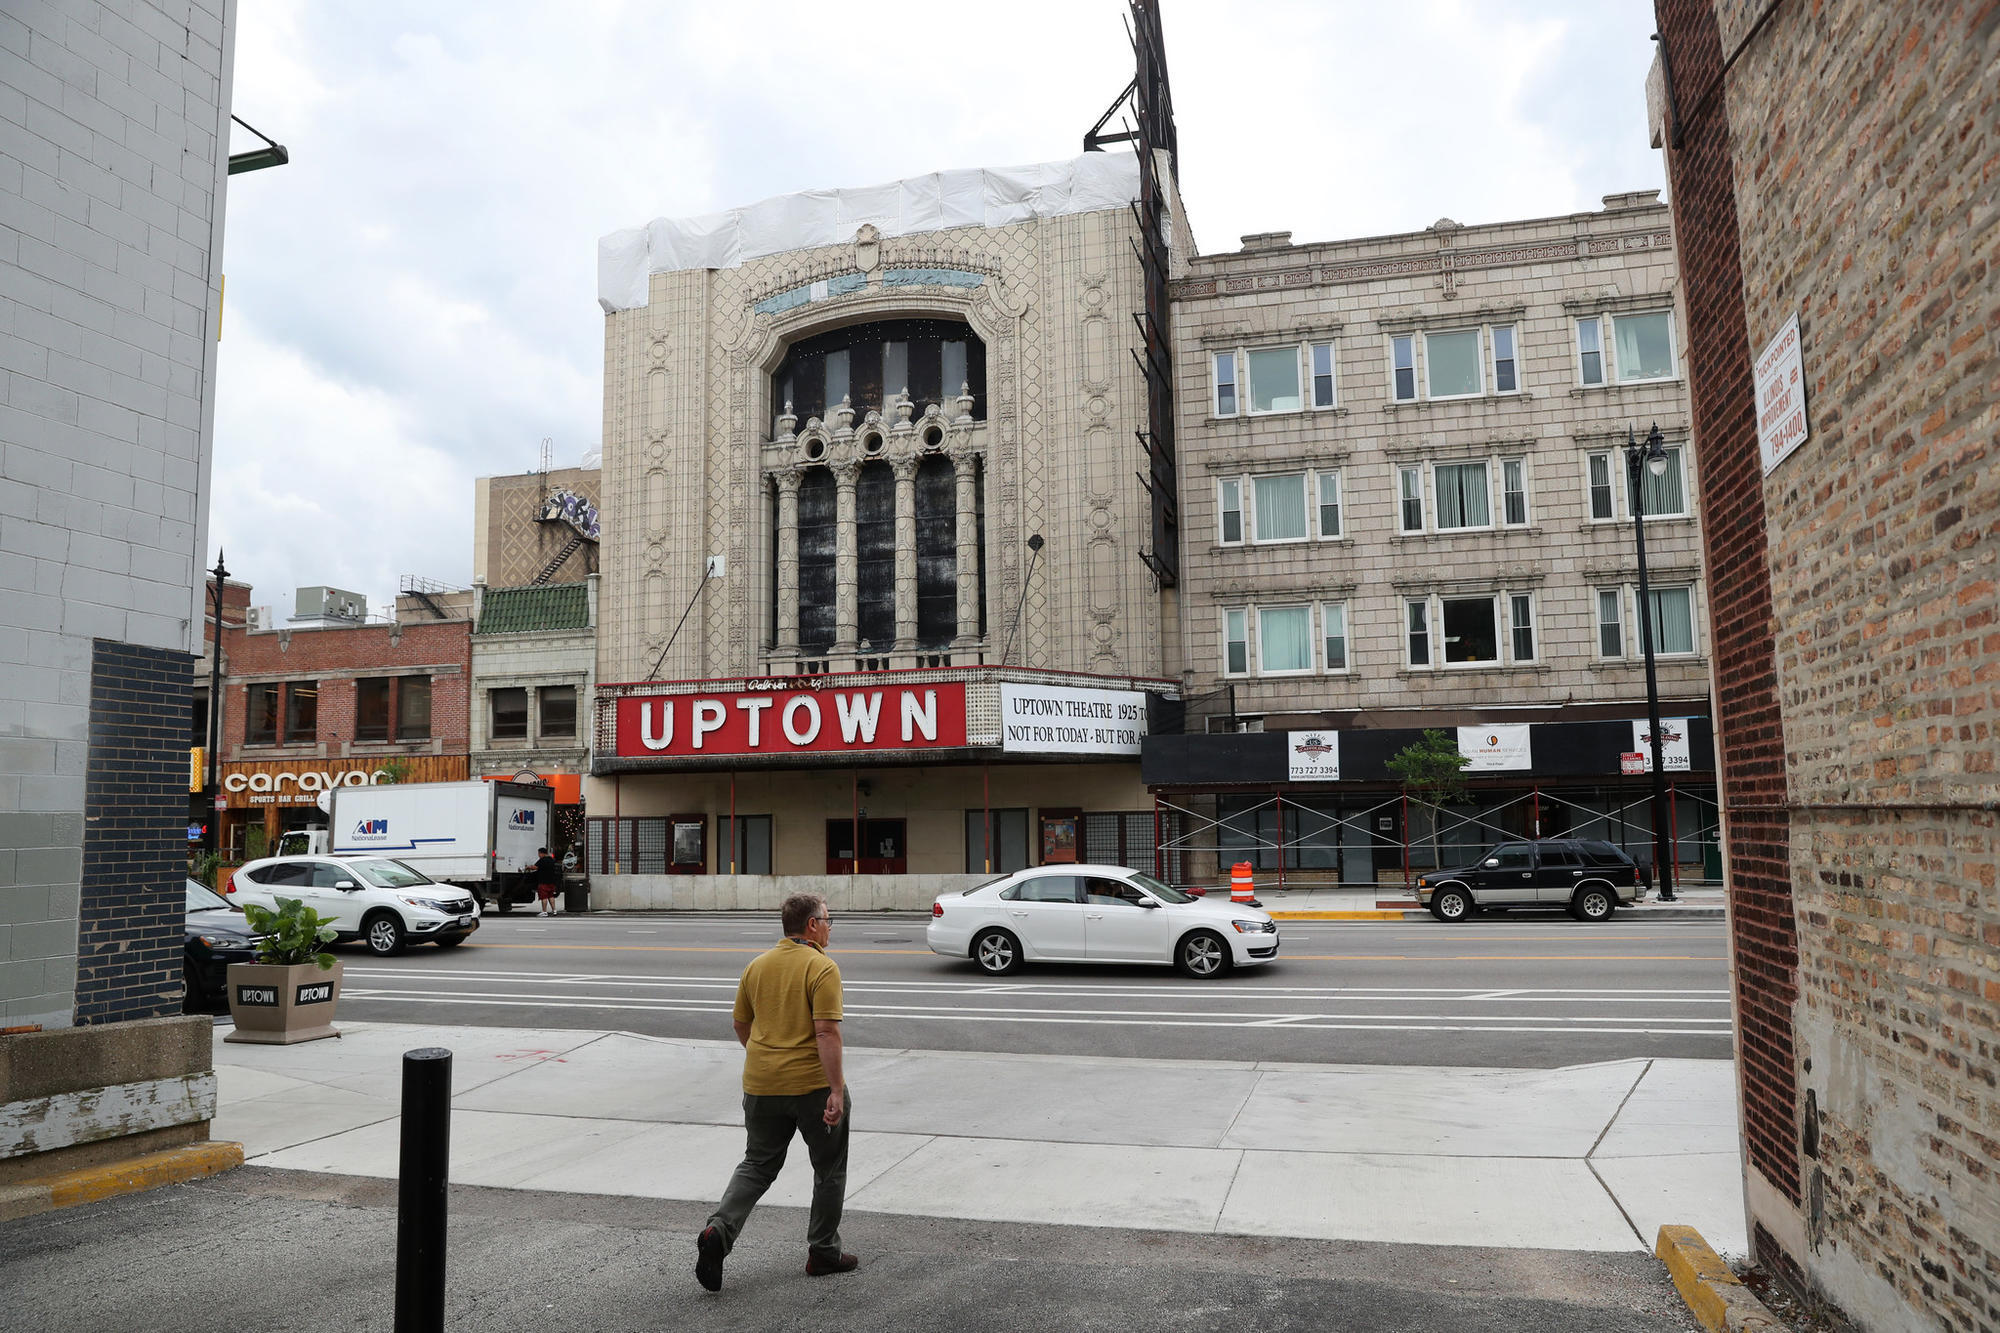 Uptown Theatre will be restored: $75 million plan unveiled for grand palace on North ...